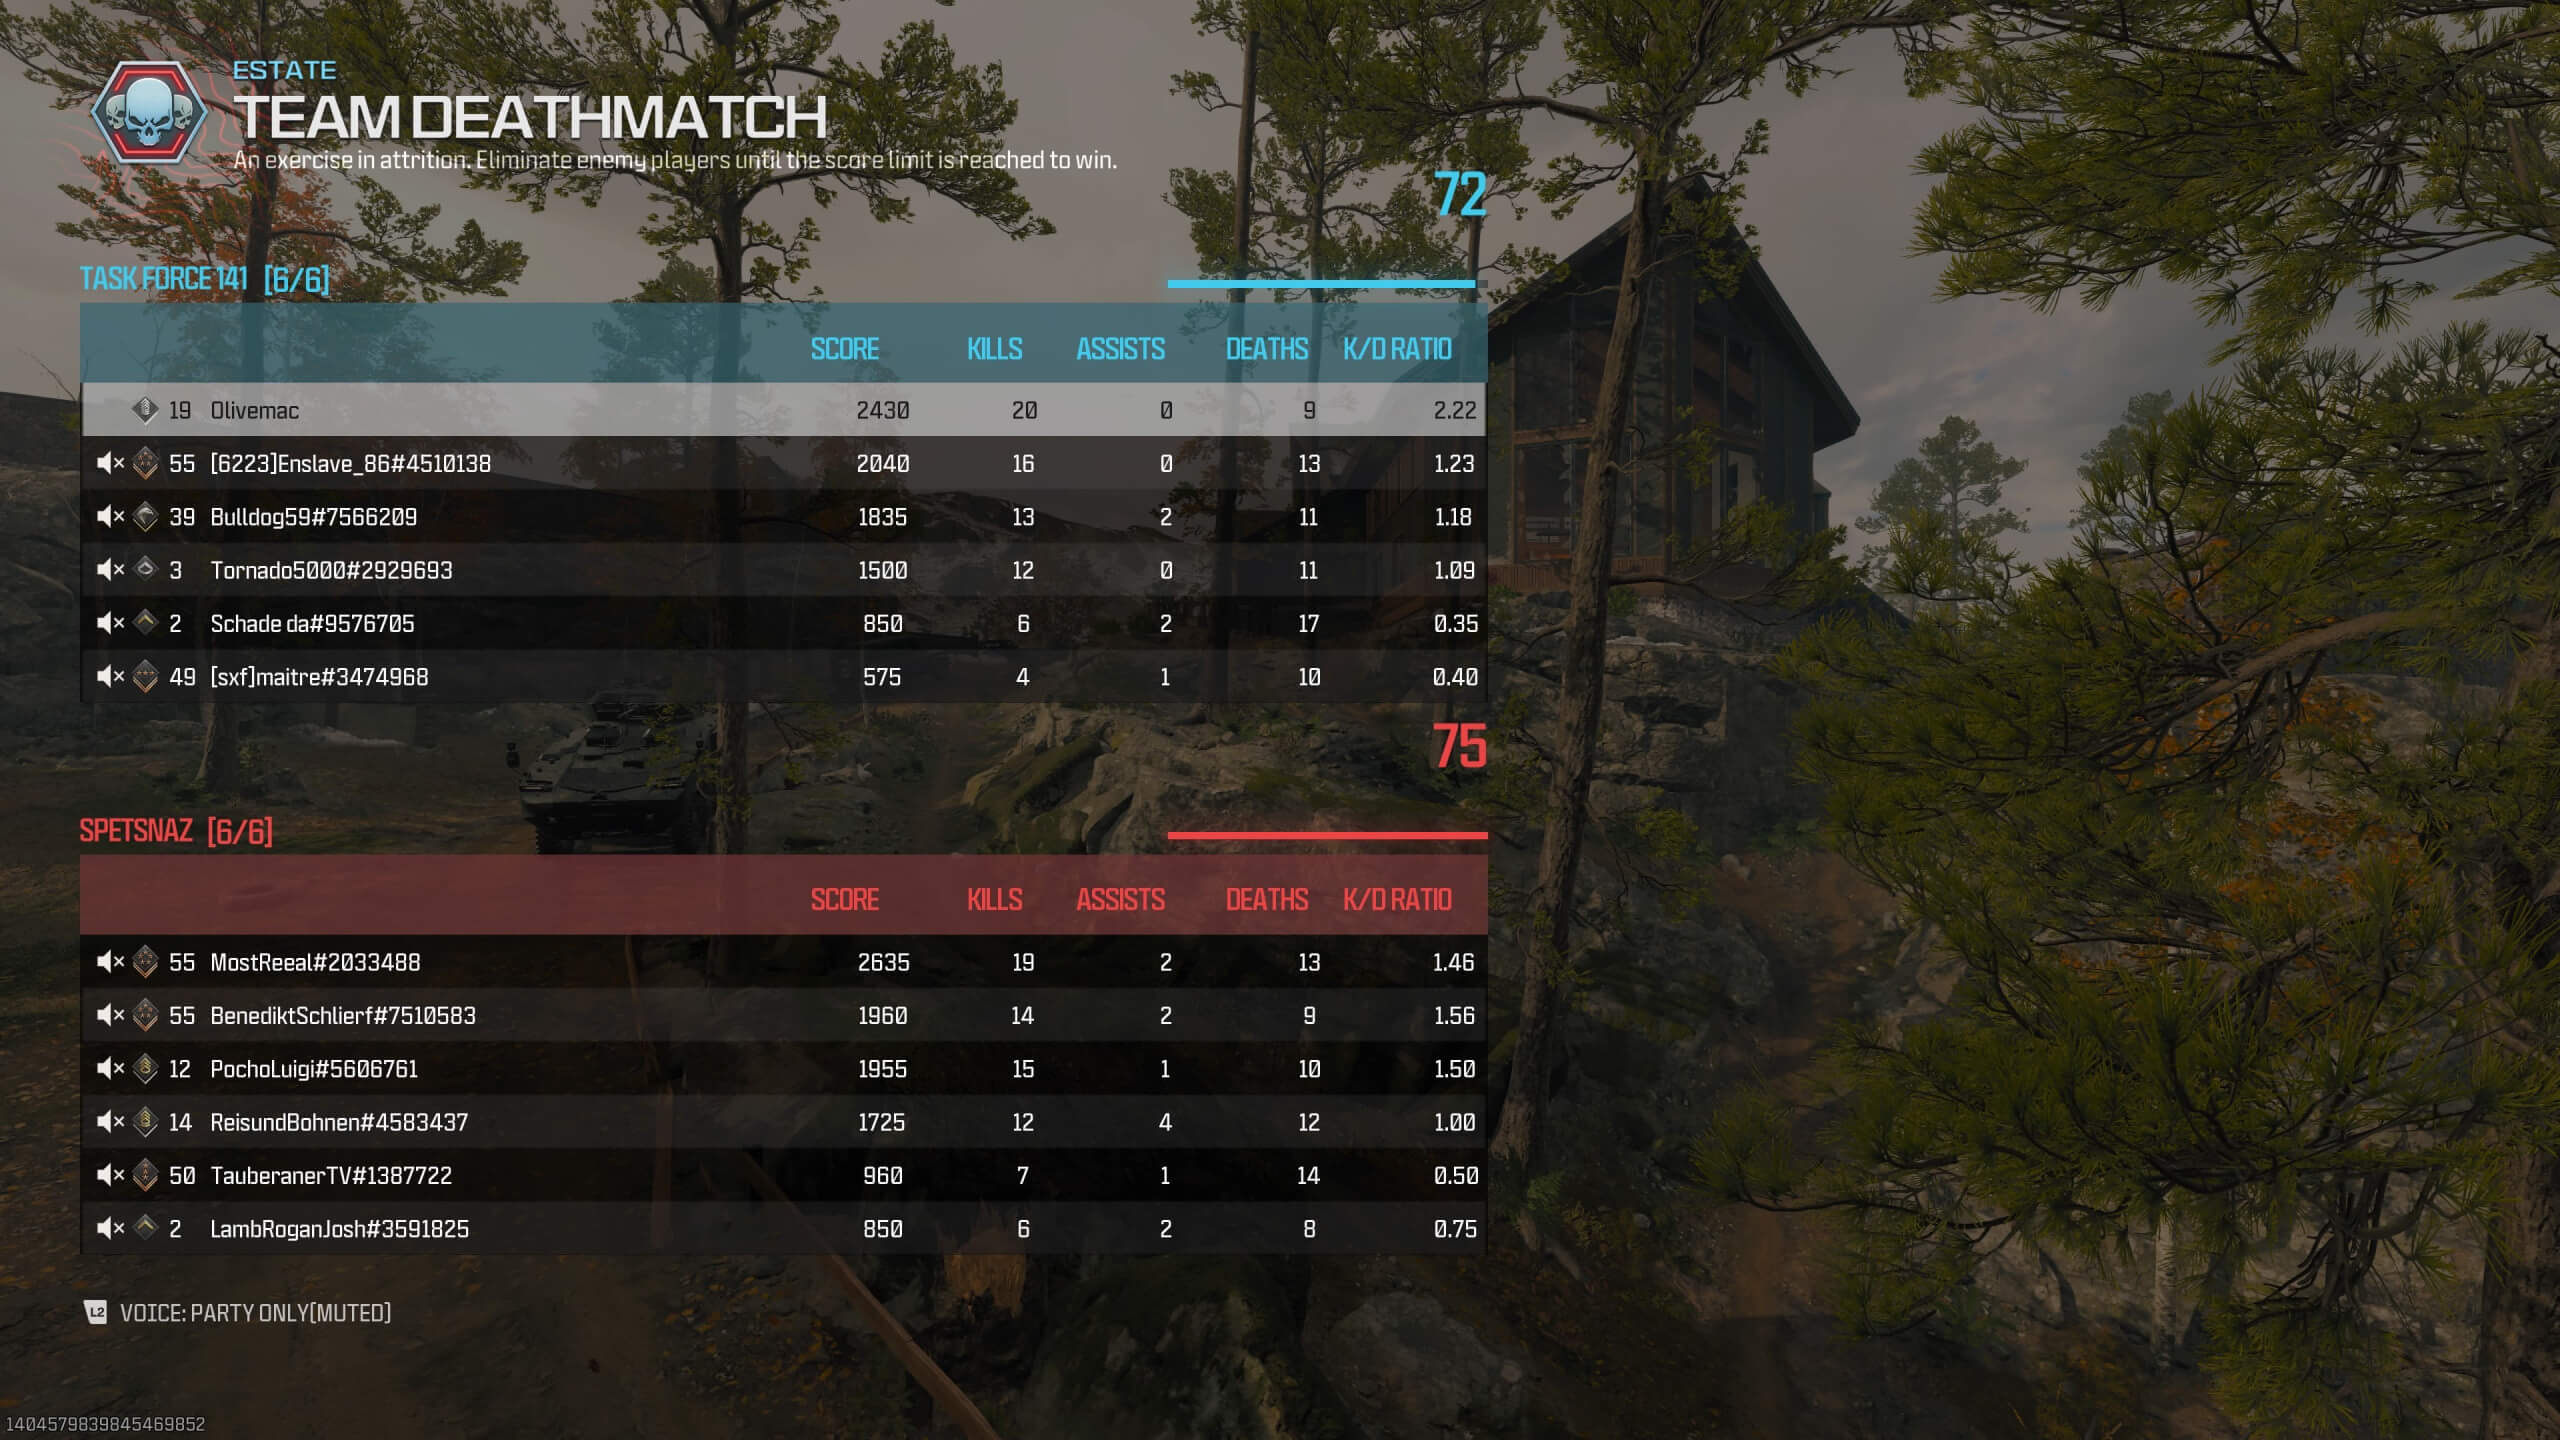 Picture shows a scoreboard with how many kills, deaths and assists each player has for each team.